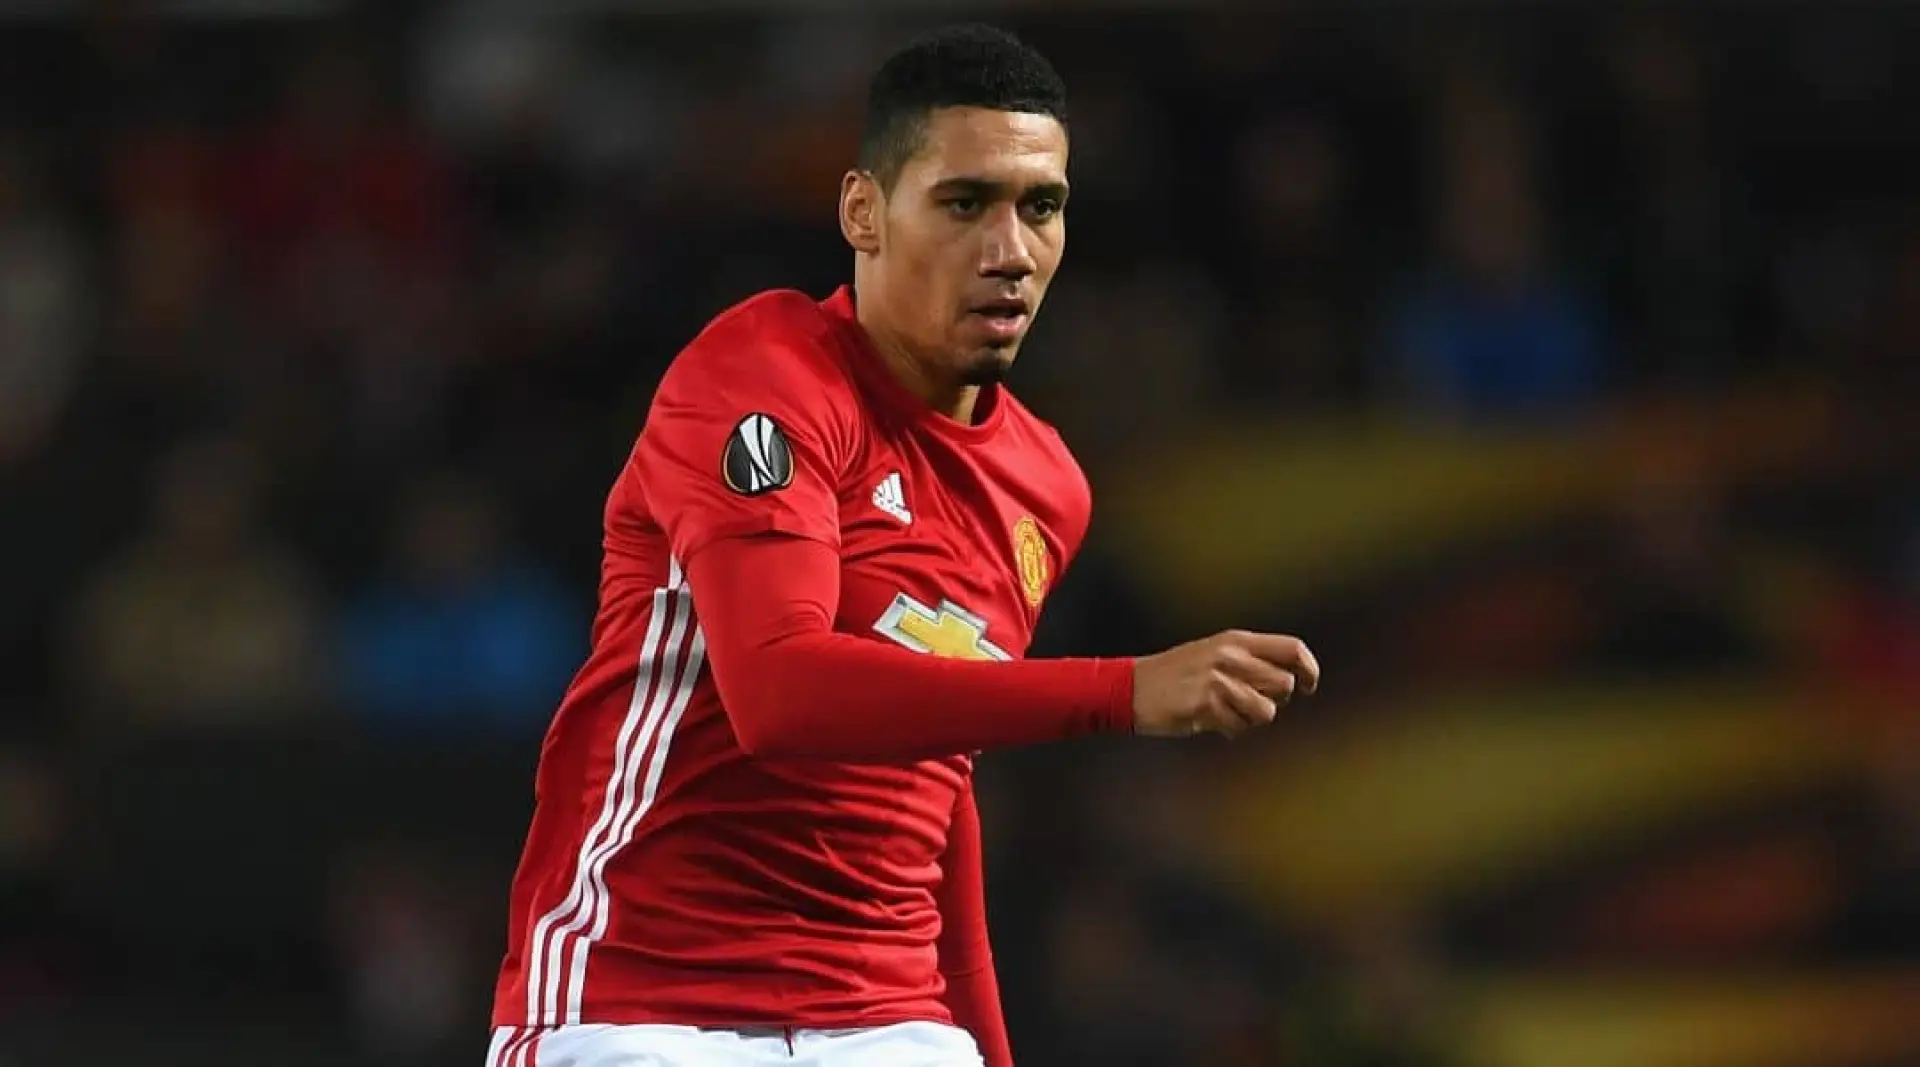 Chris Smalling - Manchester United